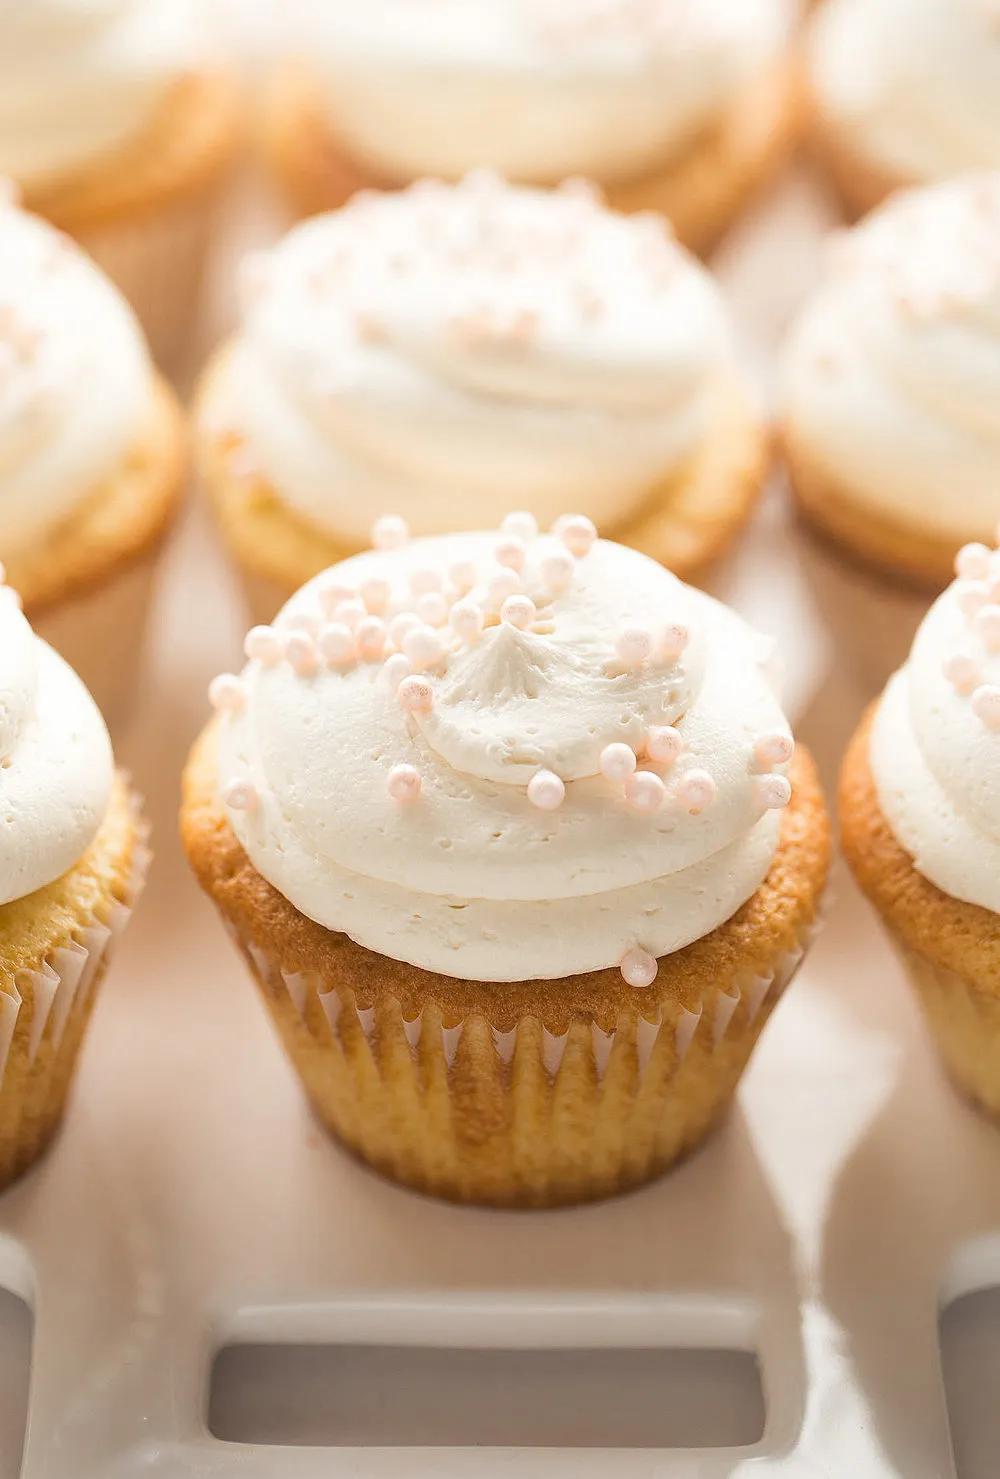 Fluffiest Vanilla Cupcakes with Buttercream Frosting | Truffles and Trends